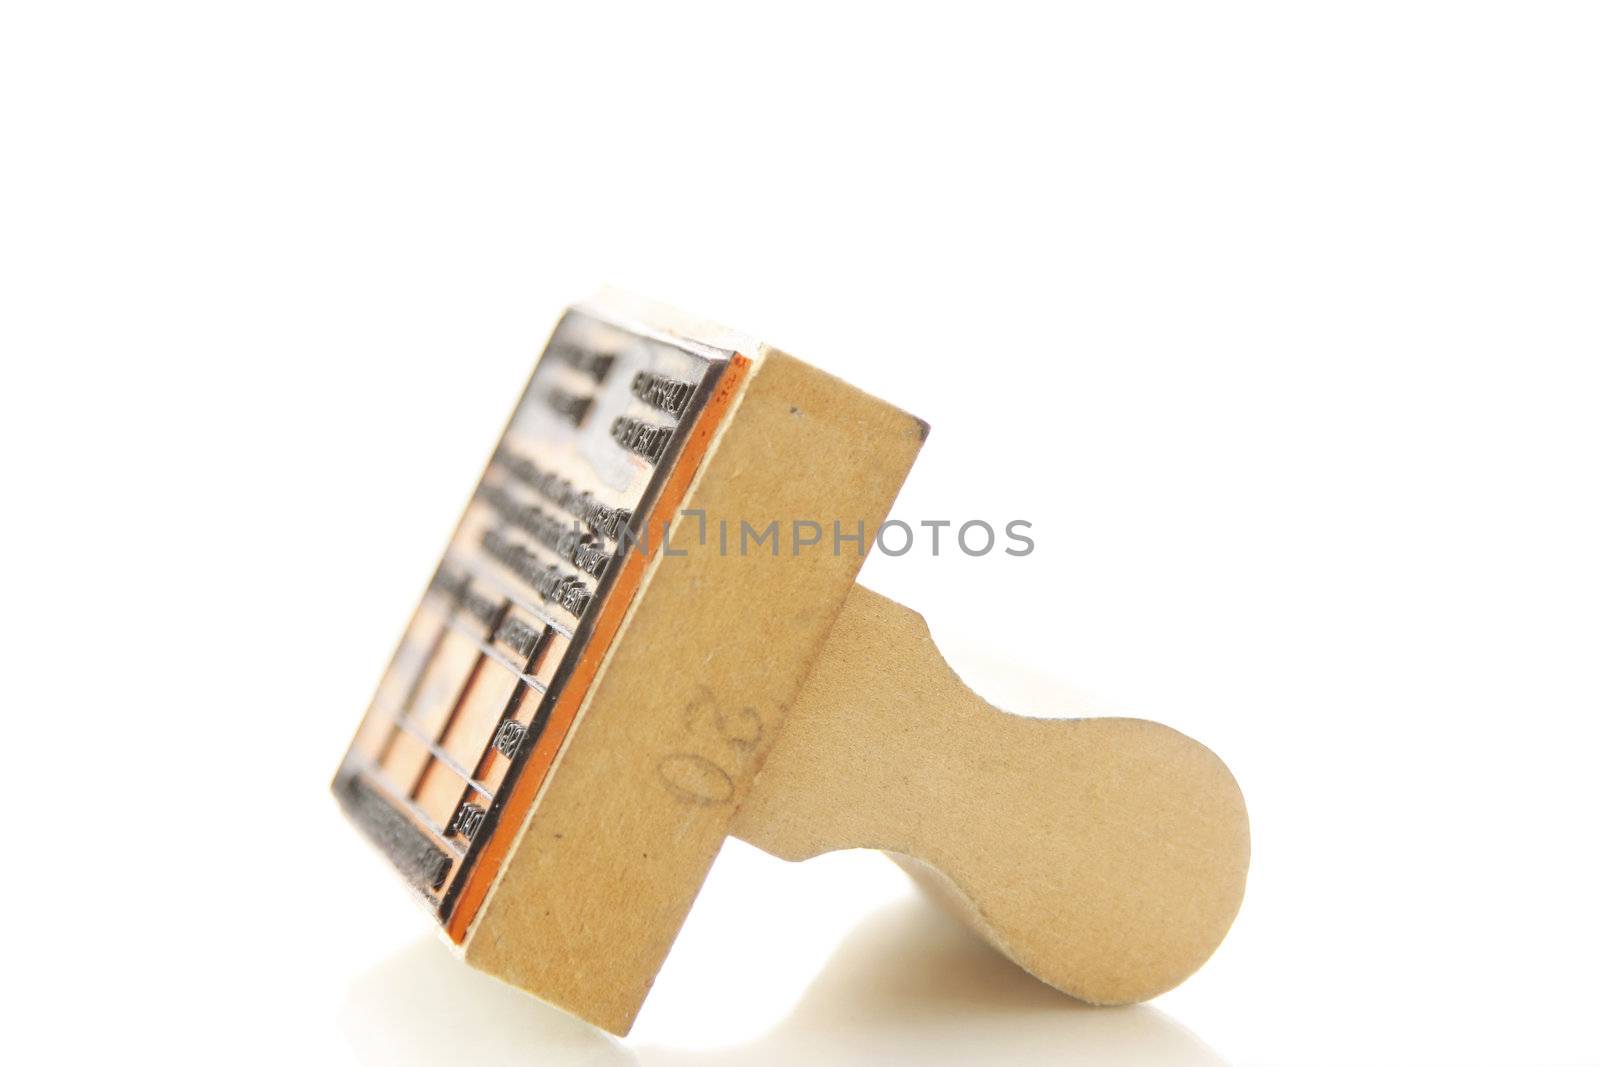 Wooden stamp on white background -use for review and approval